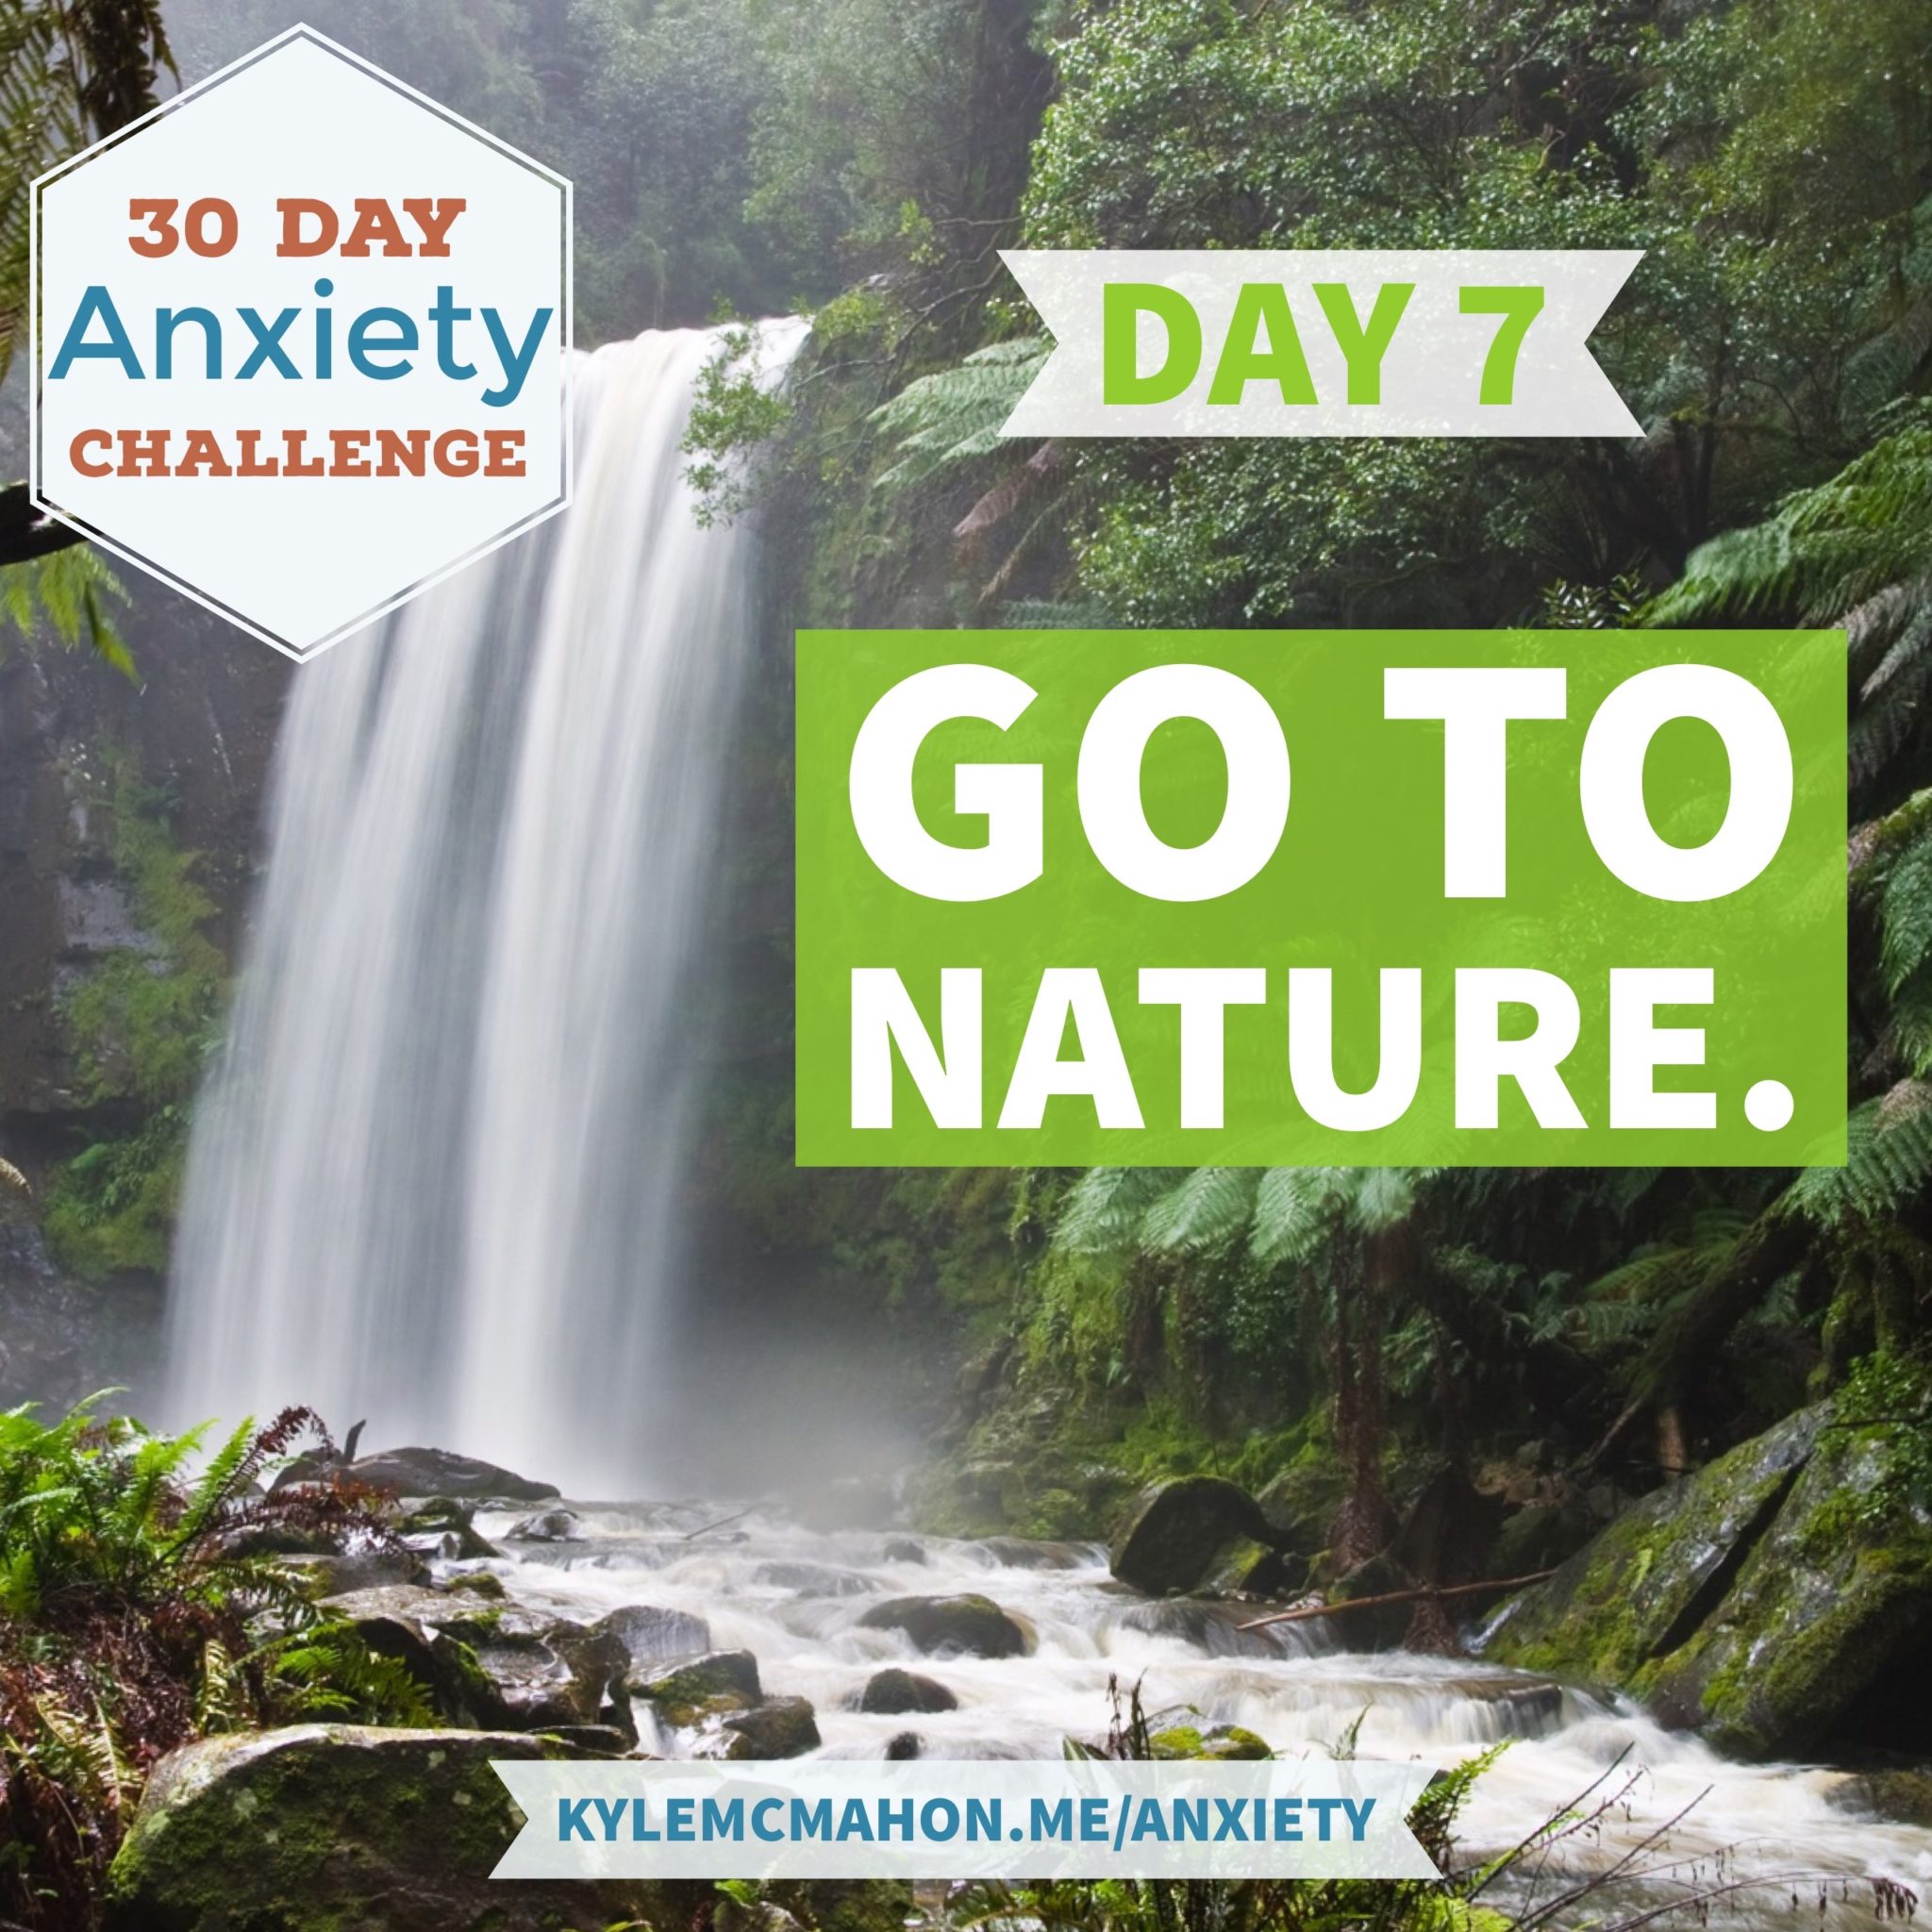 Day 7 of the 30 Day anxiety challenge with Kyle McMahon is Go to nature